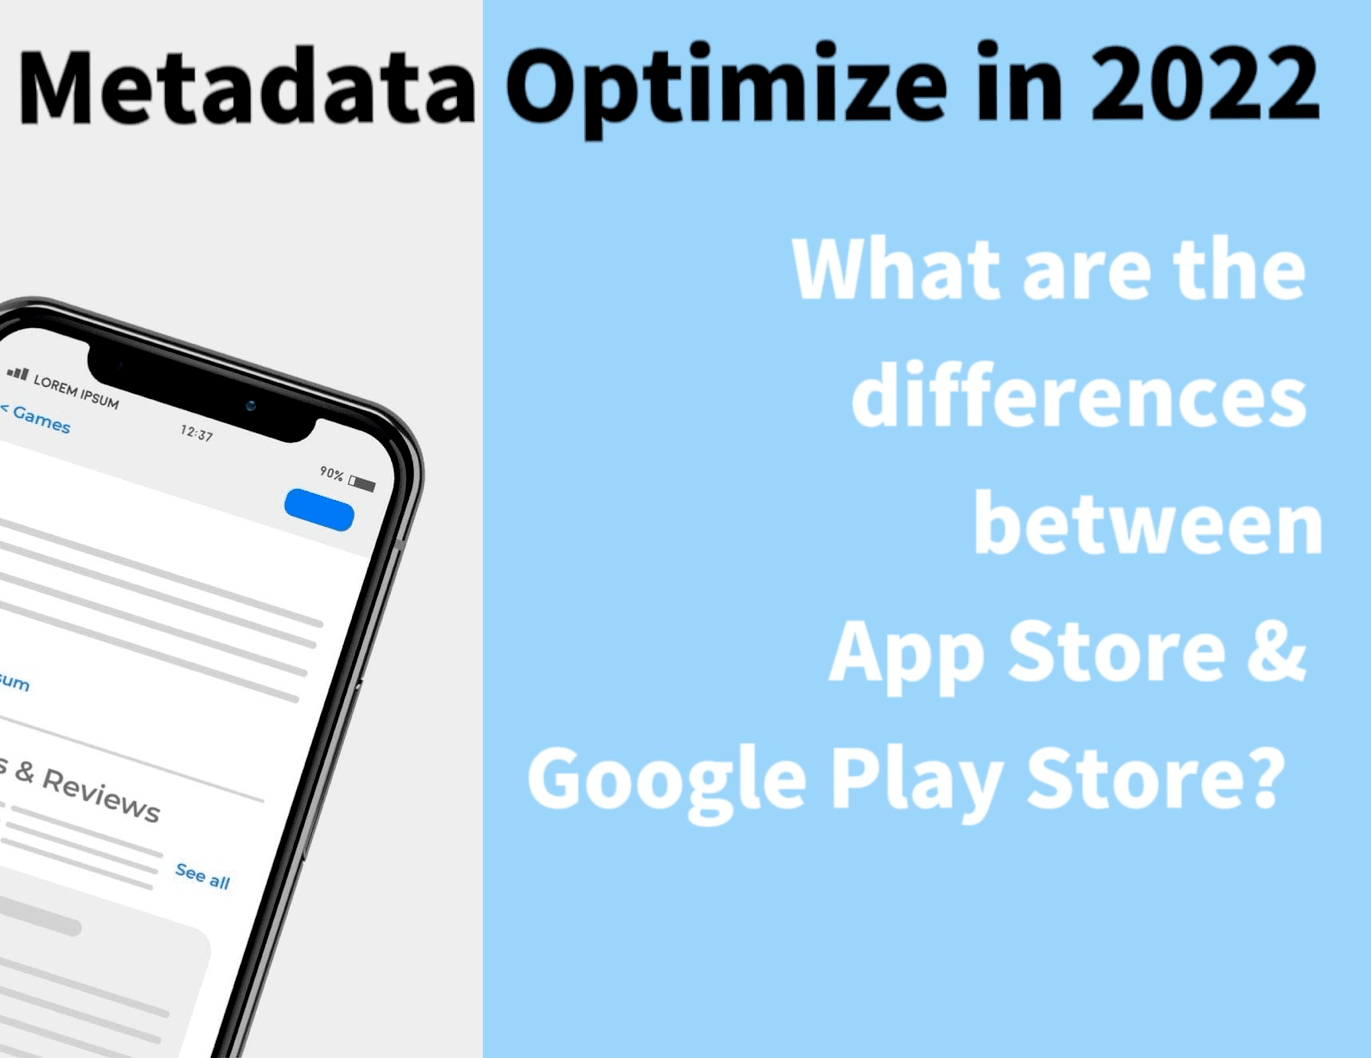 ASO On-Metadata Optimization In 2022: What Are The Differences Between Apple App Store & Google Play Store?